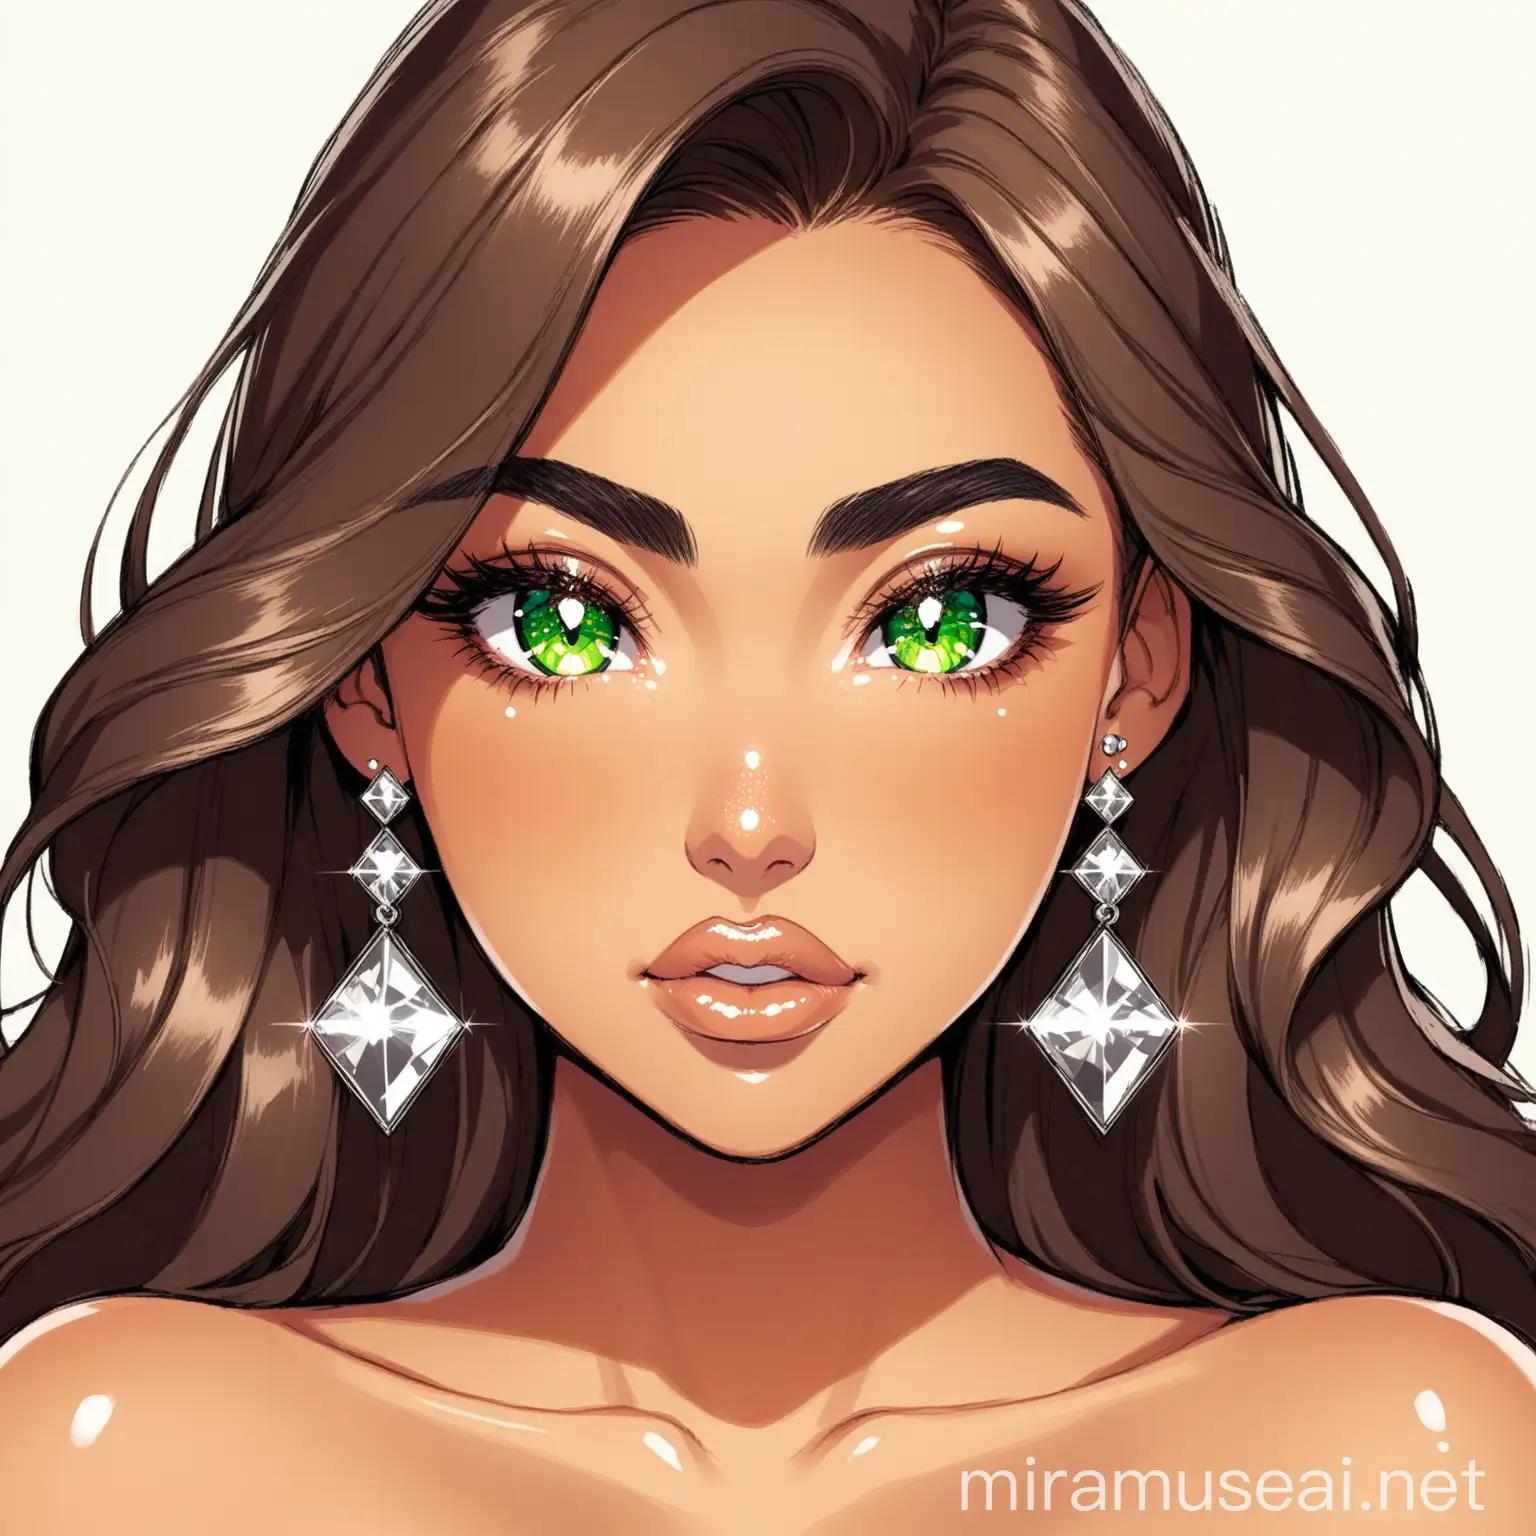 Young Woman with Long Wavy Brown Hair and Green Hazel Eyes Wearing Silver Earrings